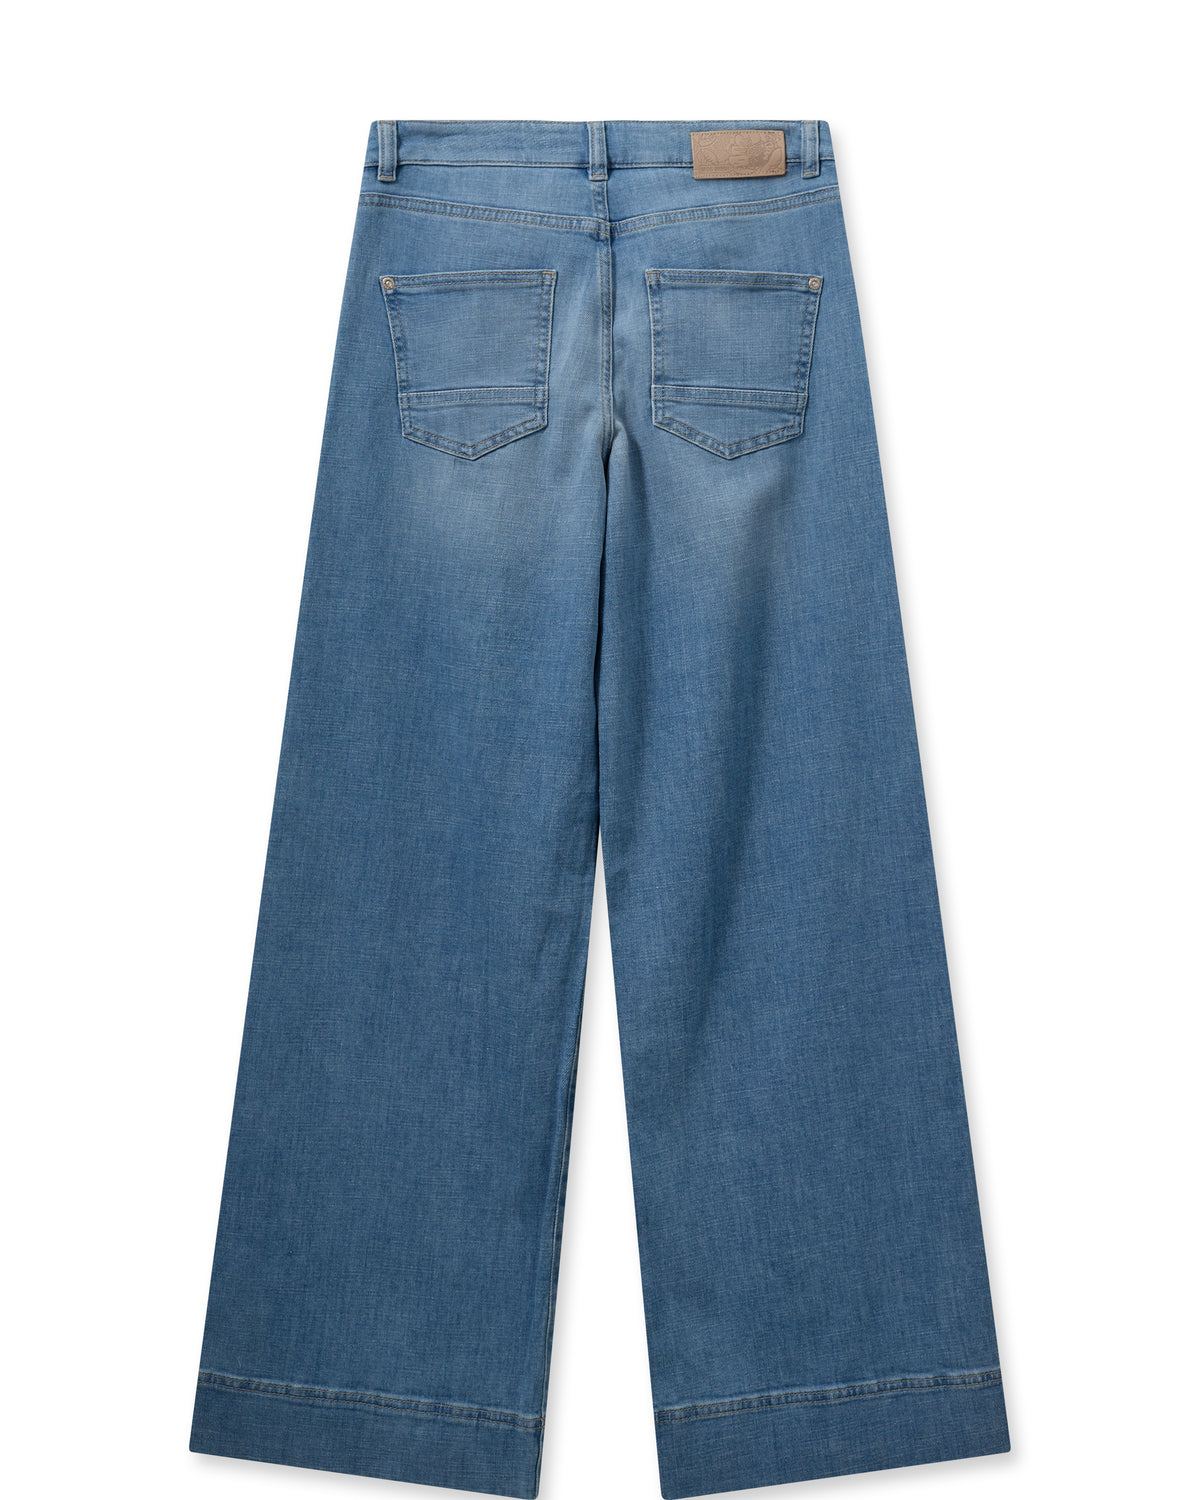 Rear view of wide leg pale wash jeans with front seam